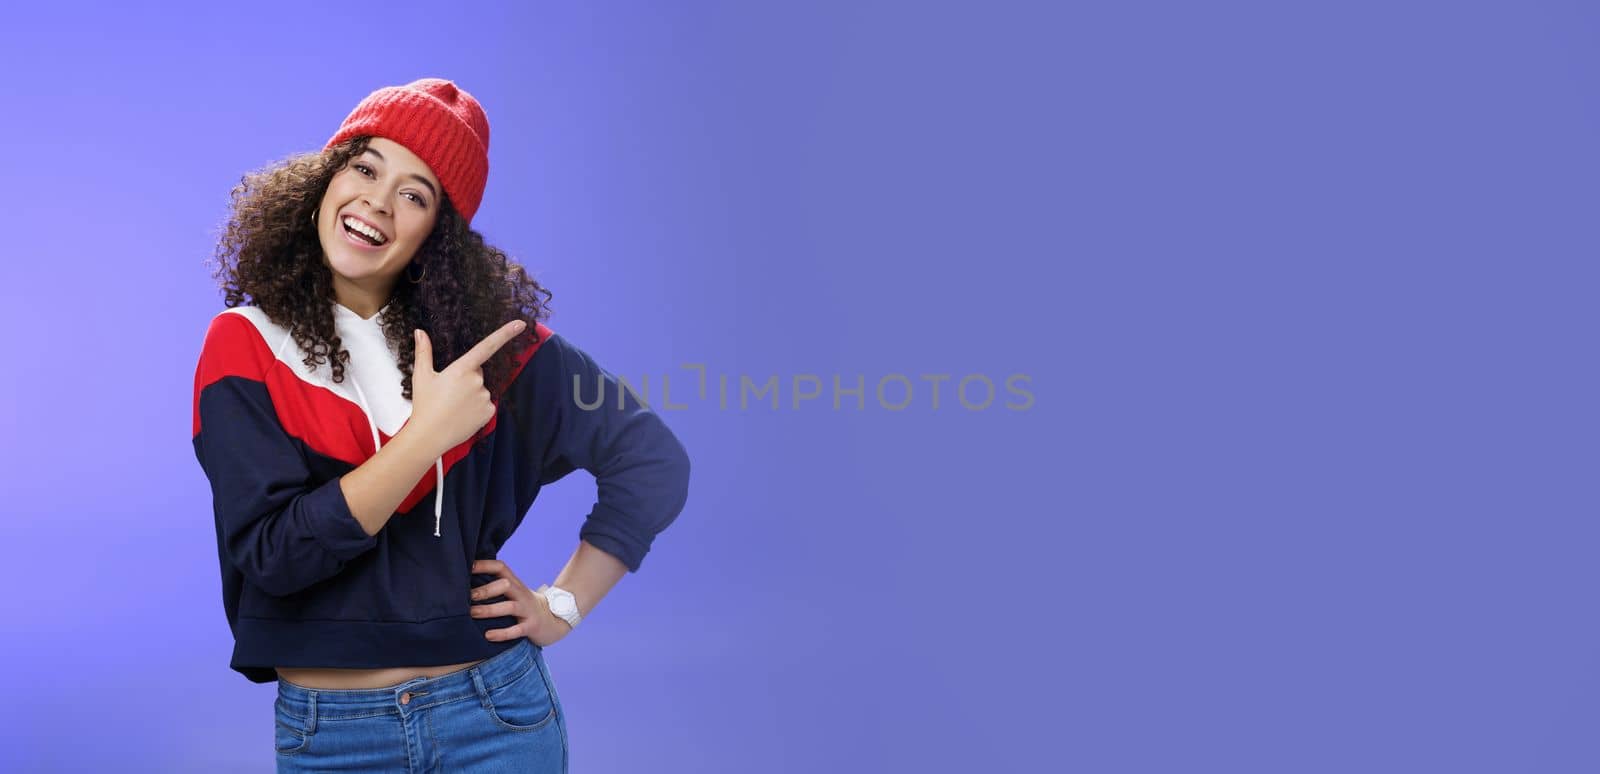 Studio shot of enthusiastic charming curly-haired woman inviting to play in snow with her pointing at upper right corner tilting head joyfully and smiling, holding hand on waist over blue wall. Emotions and weather concept